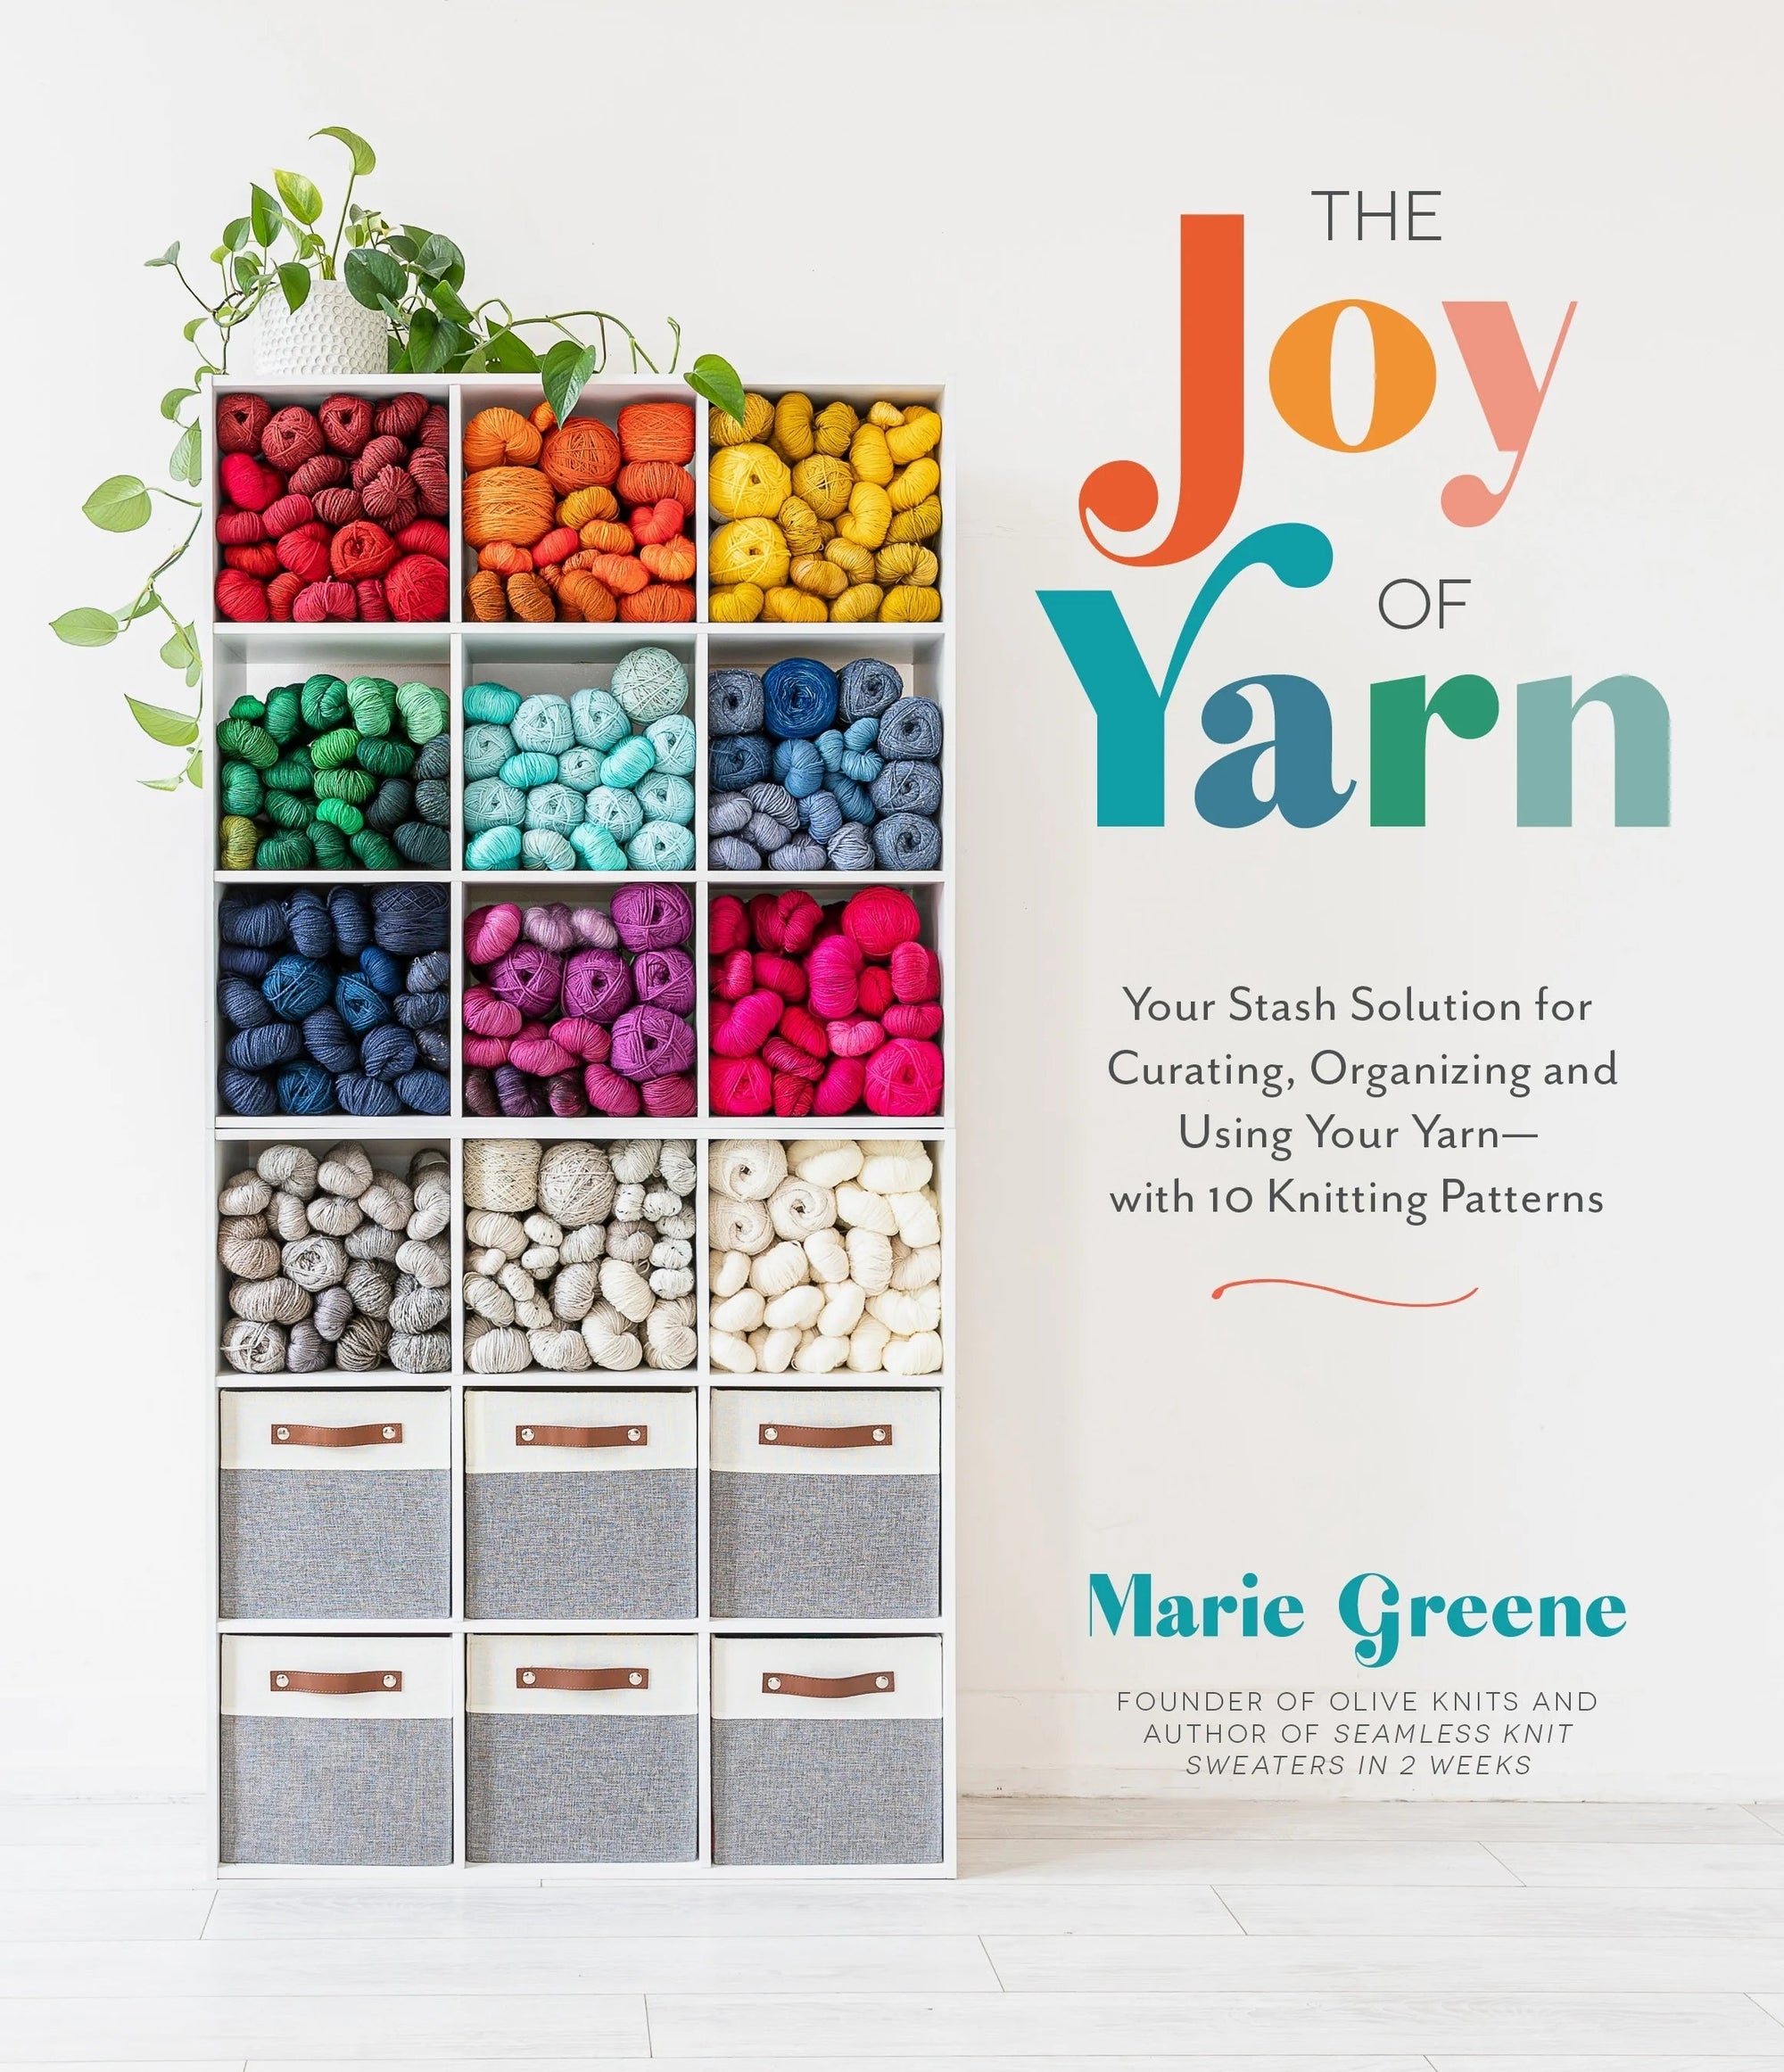 The Joy of Yarn: Your Stash Solution for Curating, Organizing and Using Your Yarn - Marie Greene - The Little Yarn Store